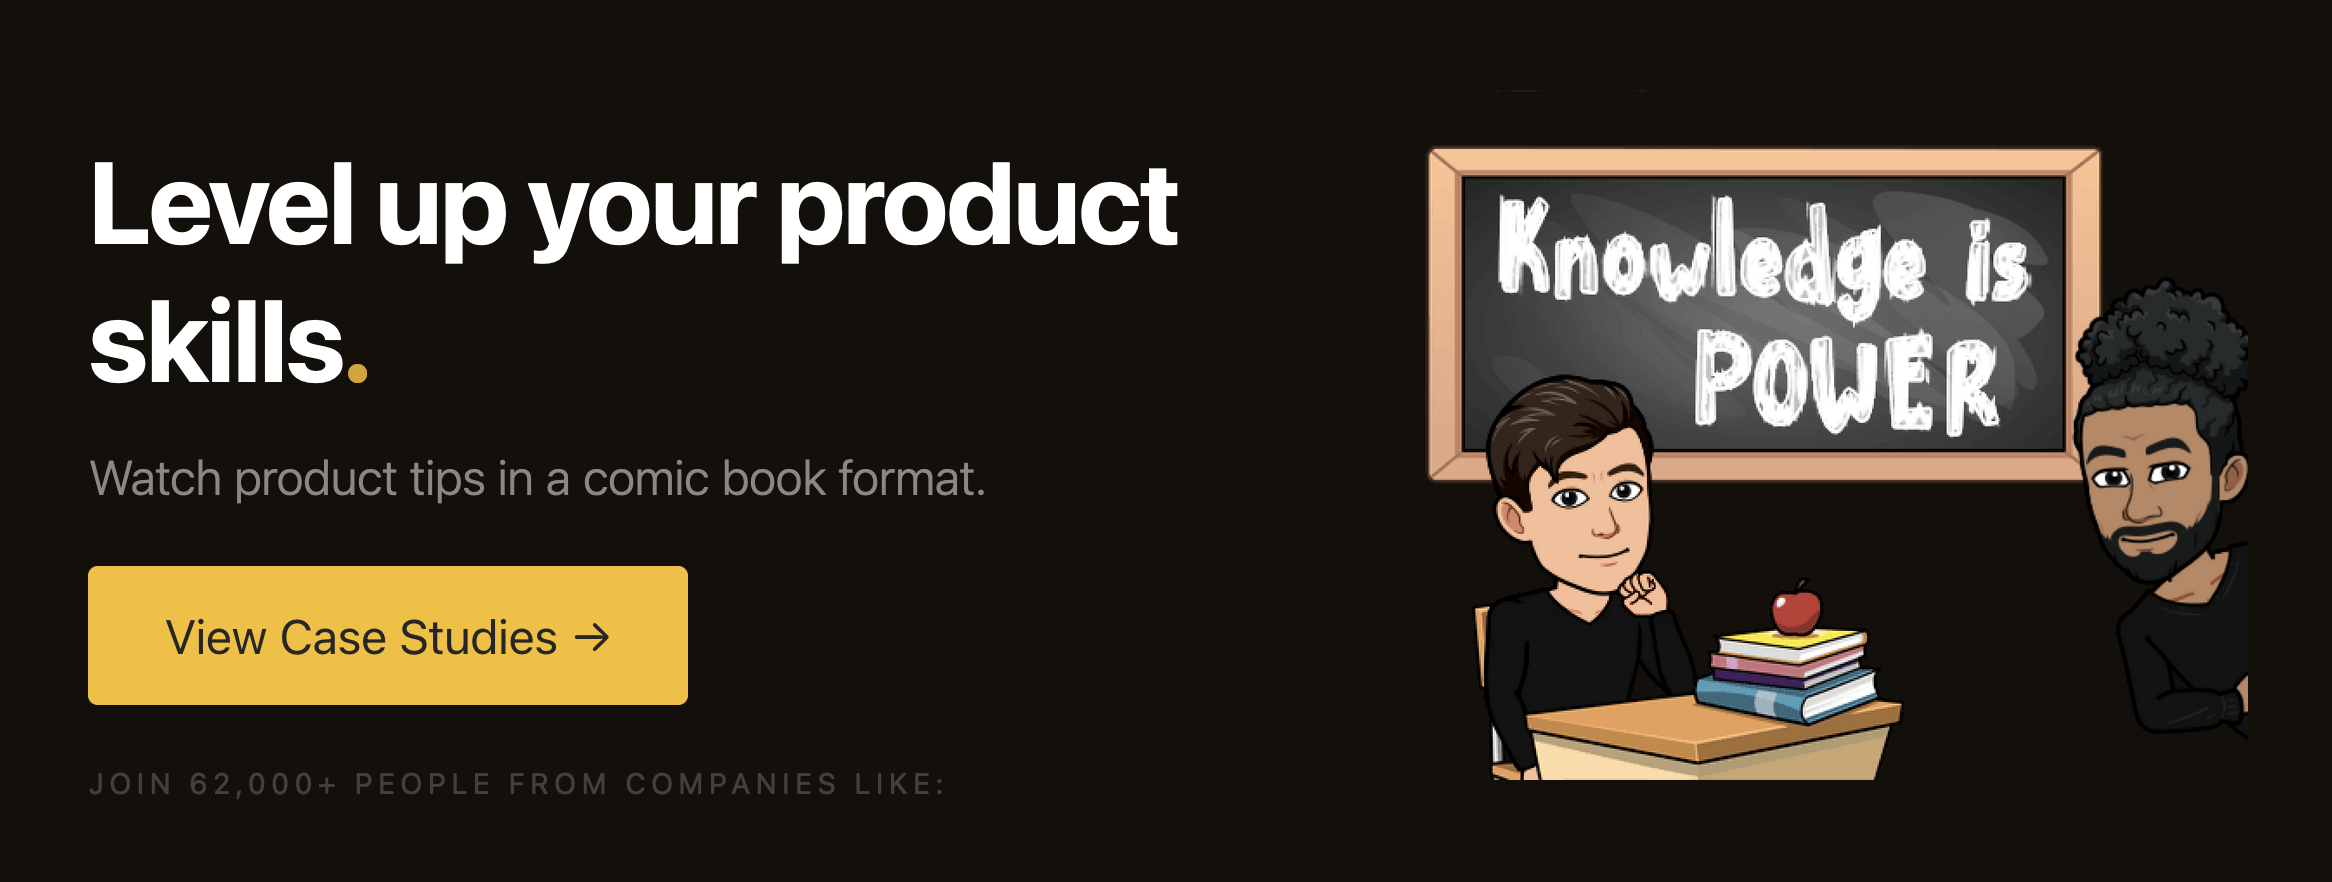 Level up your product skills. Watch product tips in a comic book format.